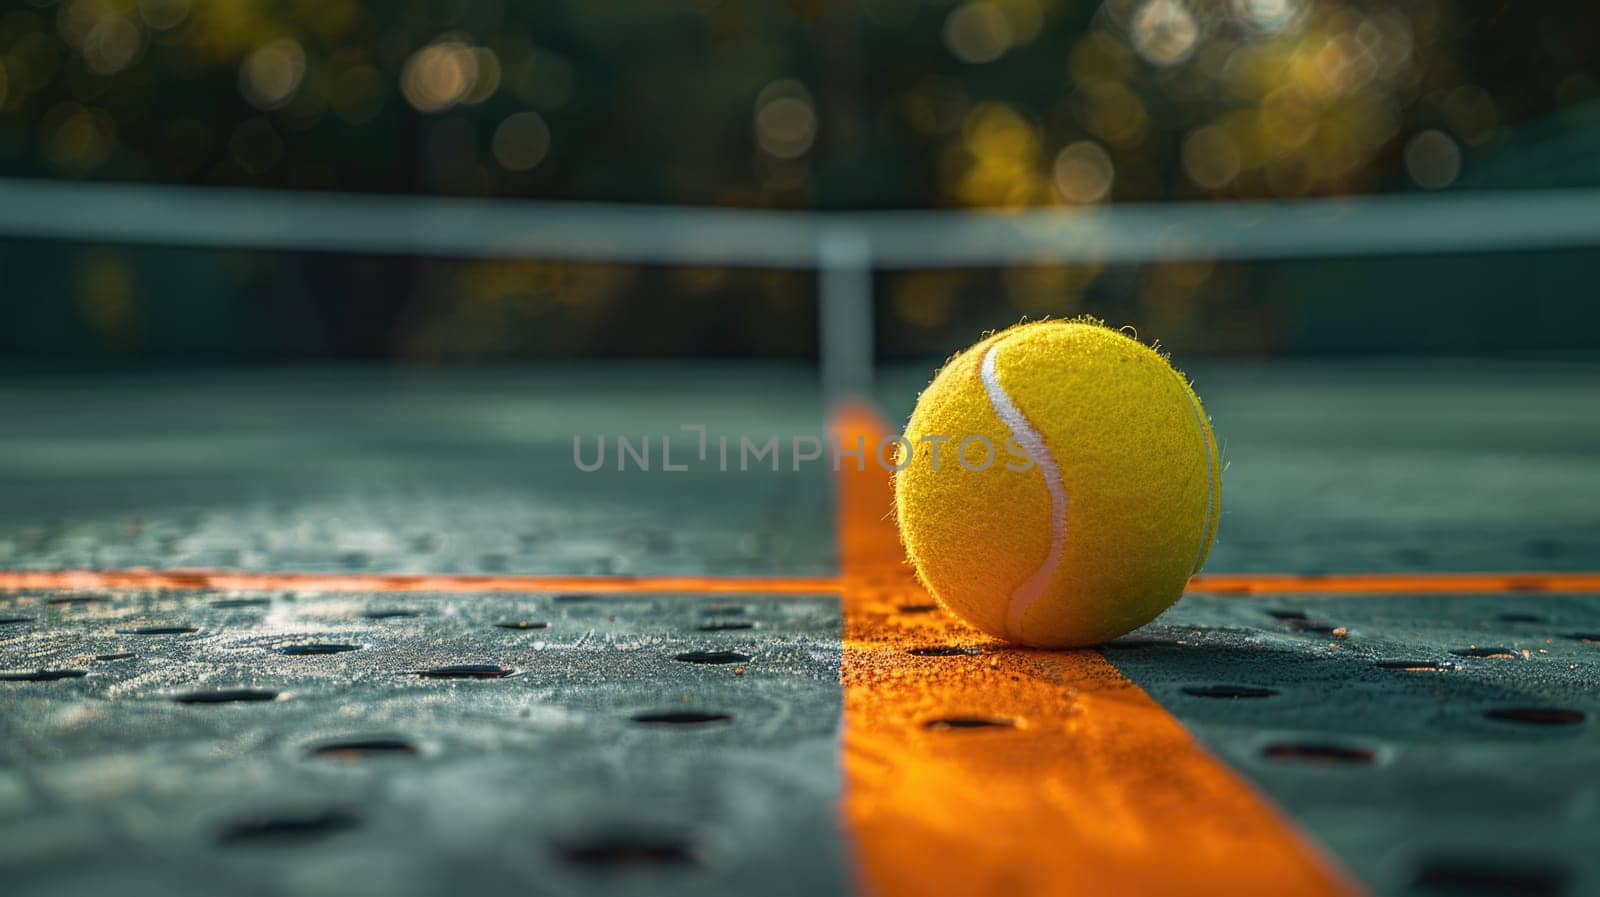 A tennis ball rests on top of a green and white tennis court surface, ready for action.